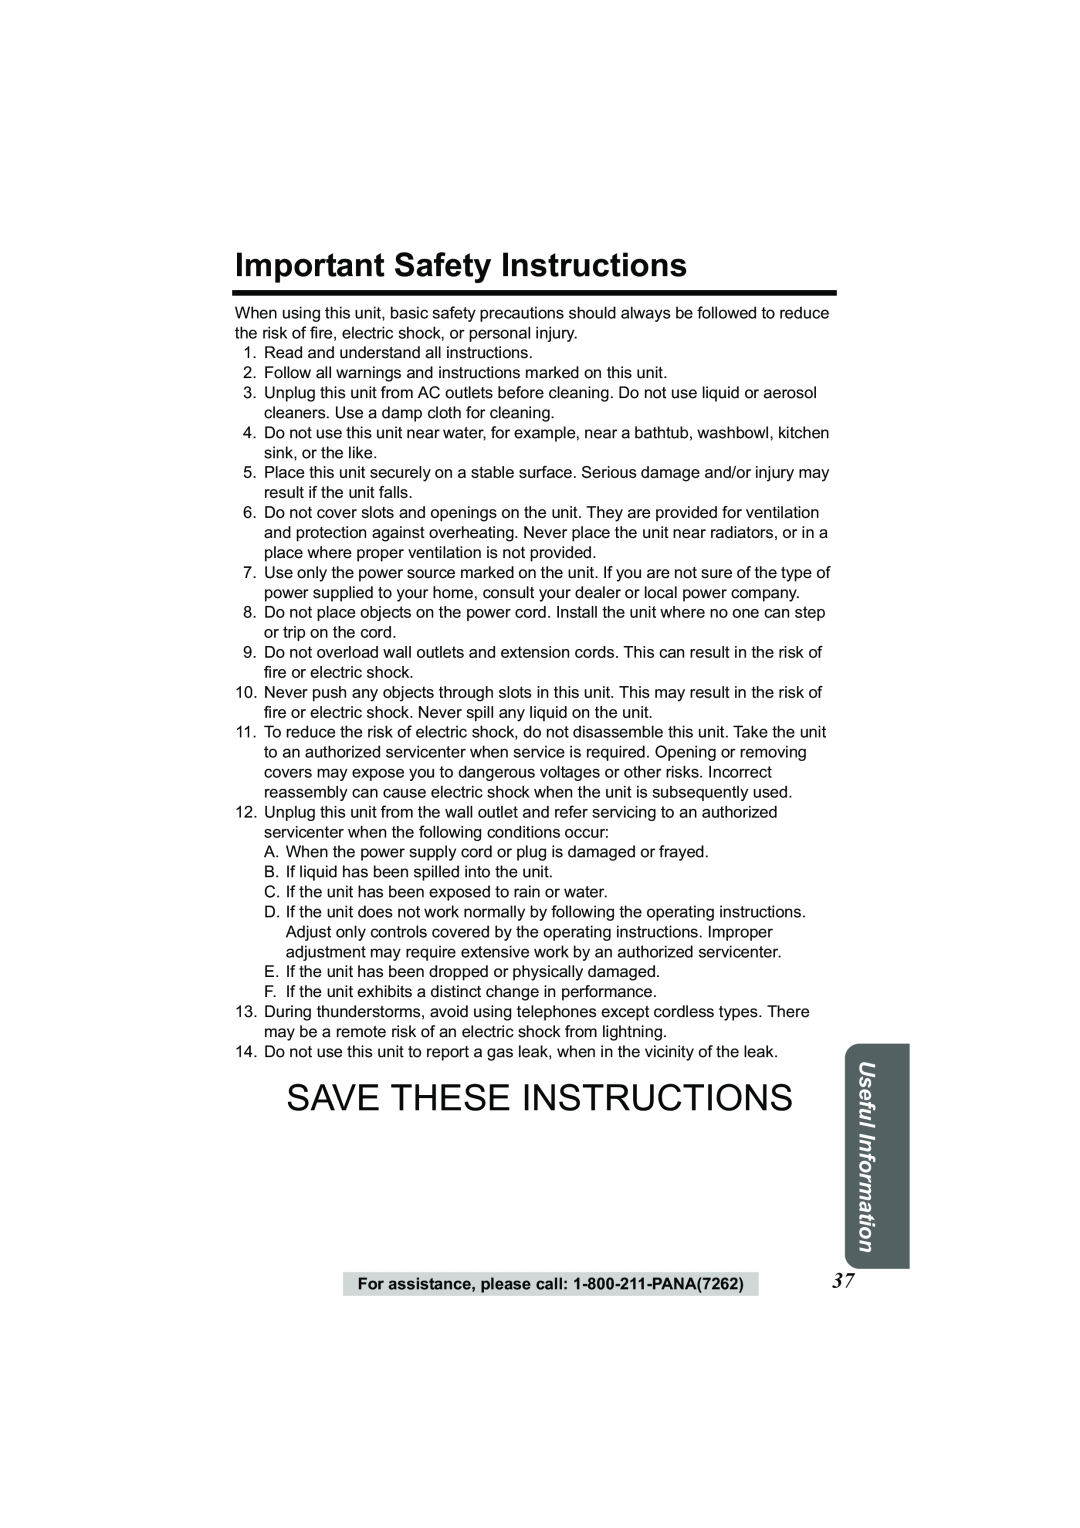 Panasonic Acr14CF.tmp manual Important Safety Instructions, Save These Instructions, Useful Information 